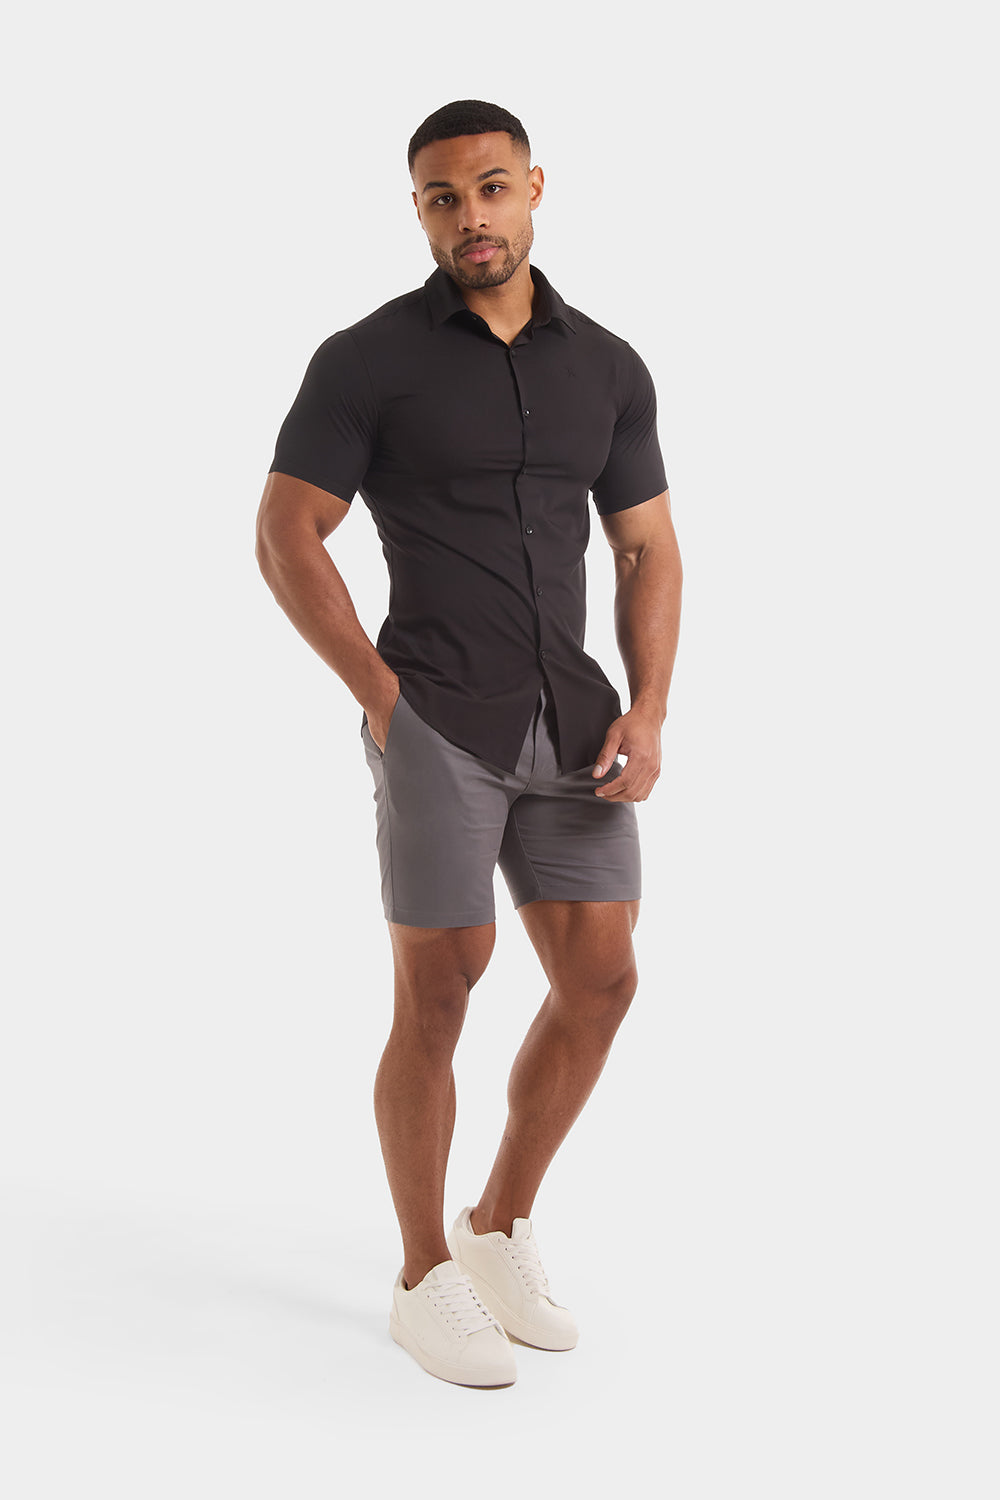 Athletic Fit Short Sleeve Bamboo Shirt in Black